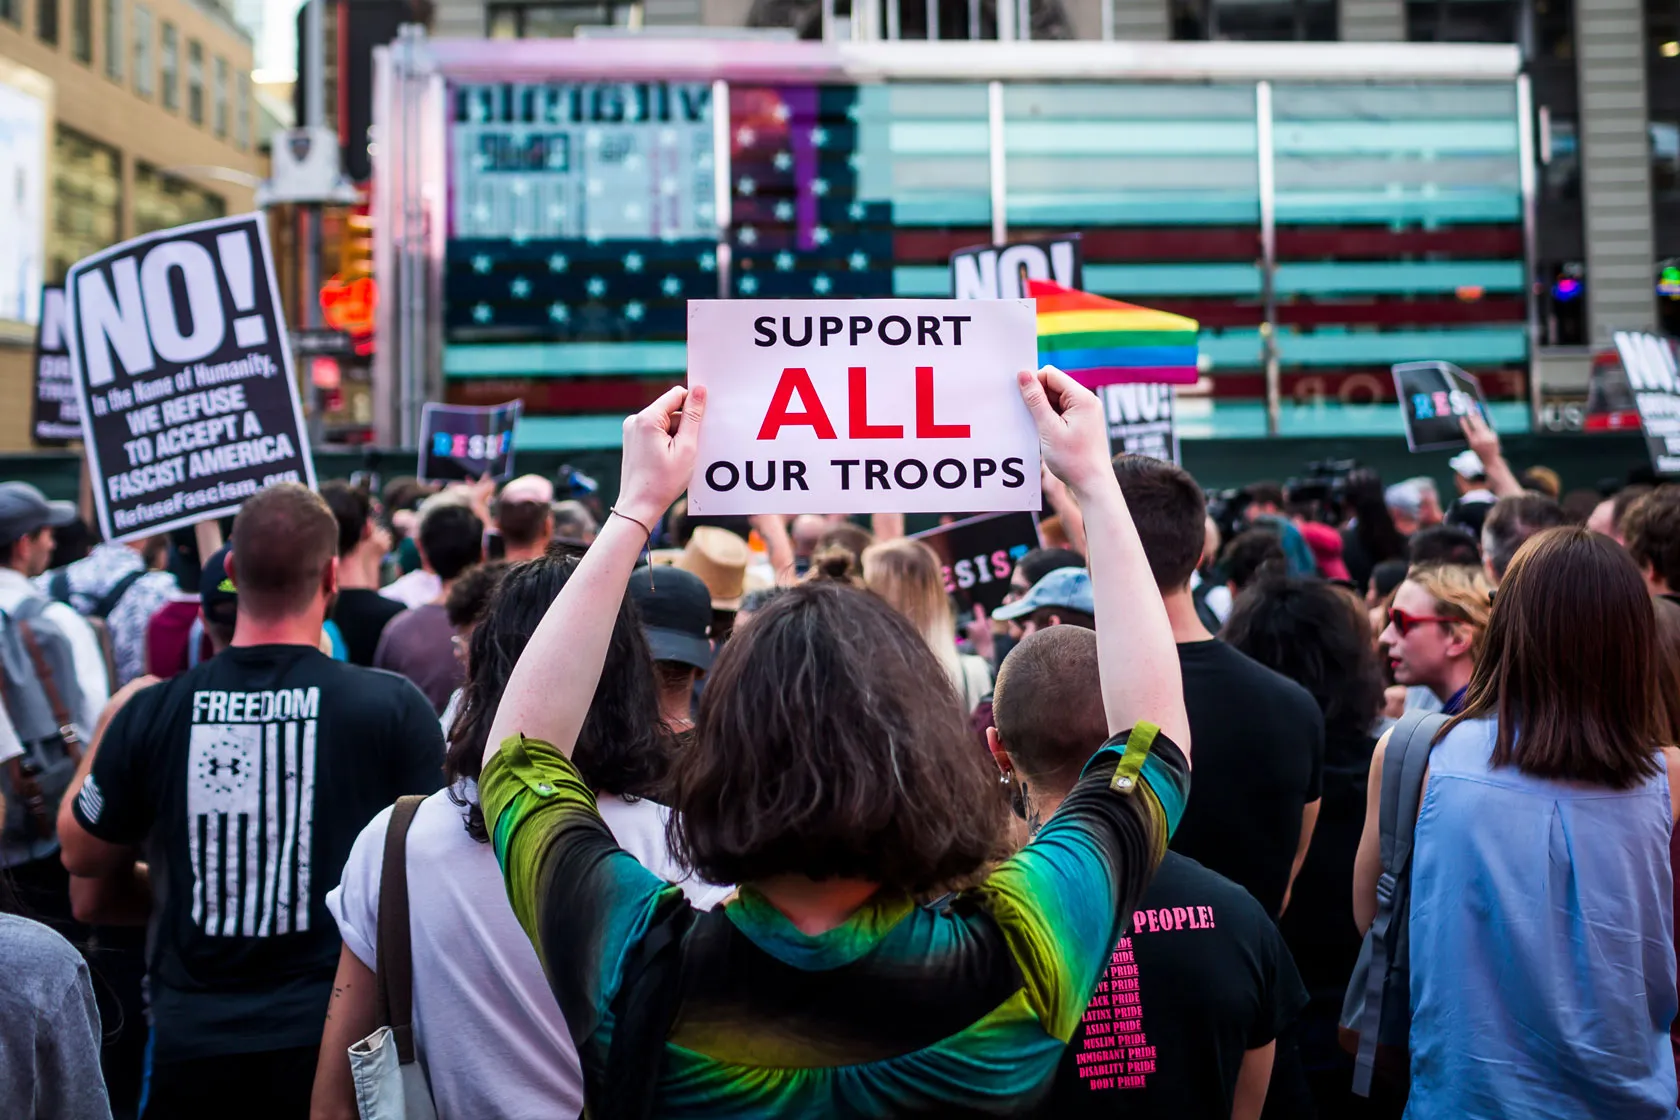 Thousands of people take the streets to protest then-President Donald Trump’s proposal to ban transgender people from serving in the military. The person in the foreground holds a sign that says 